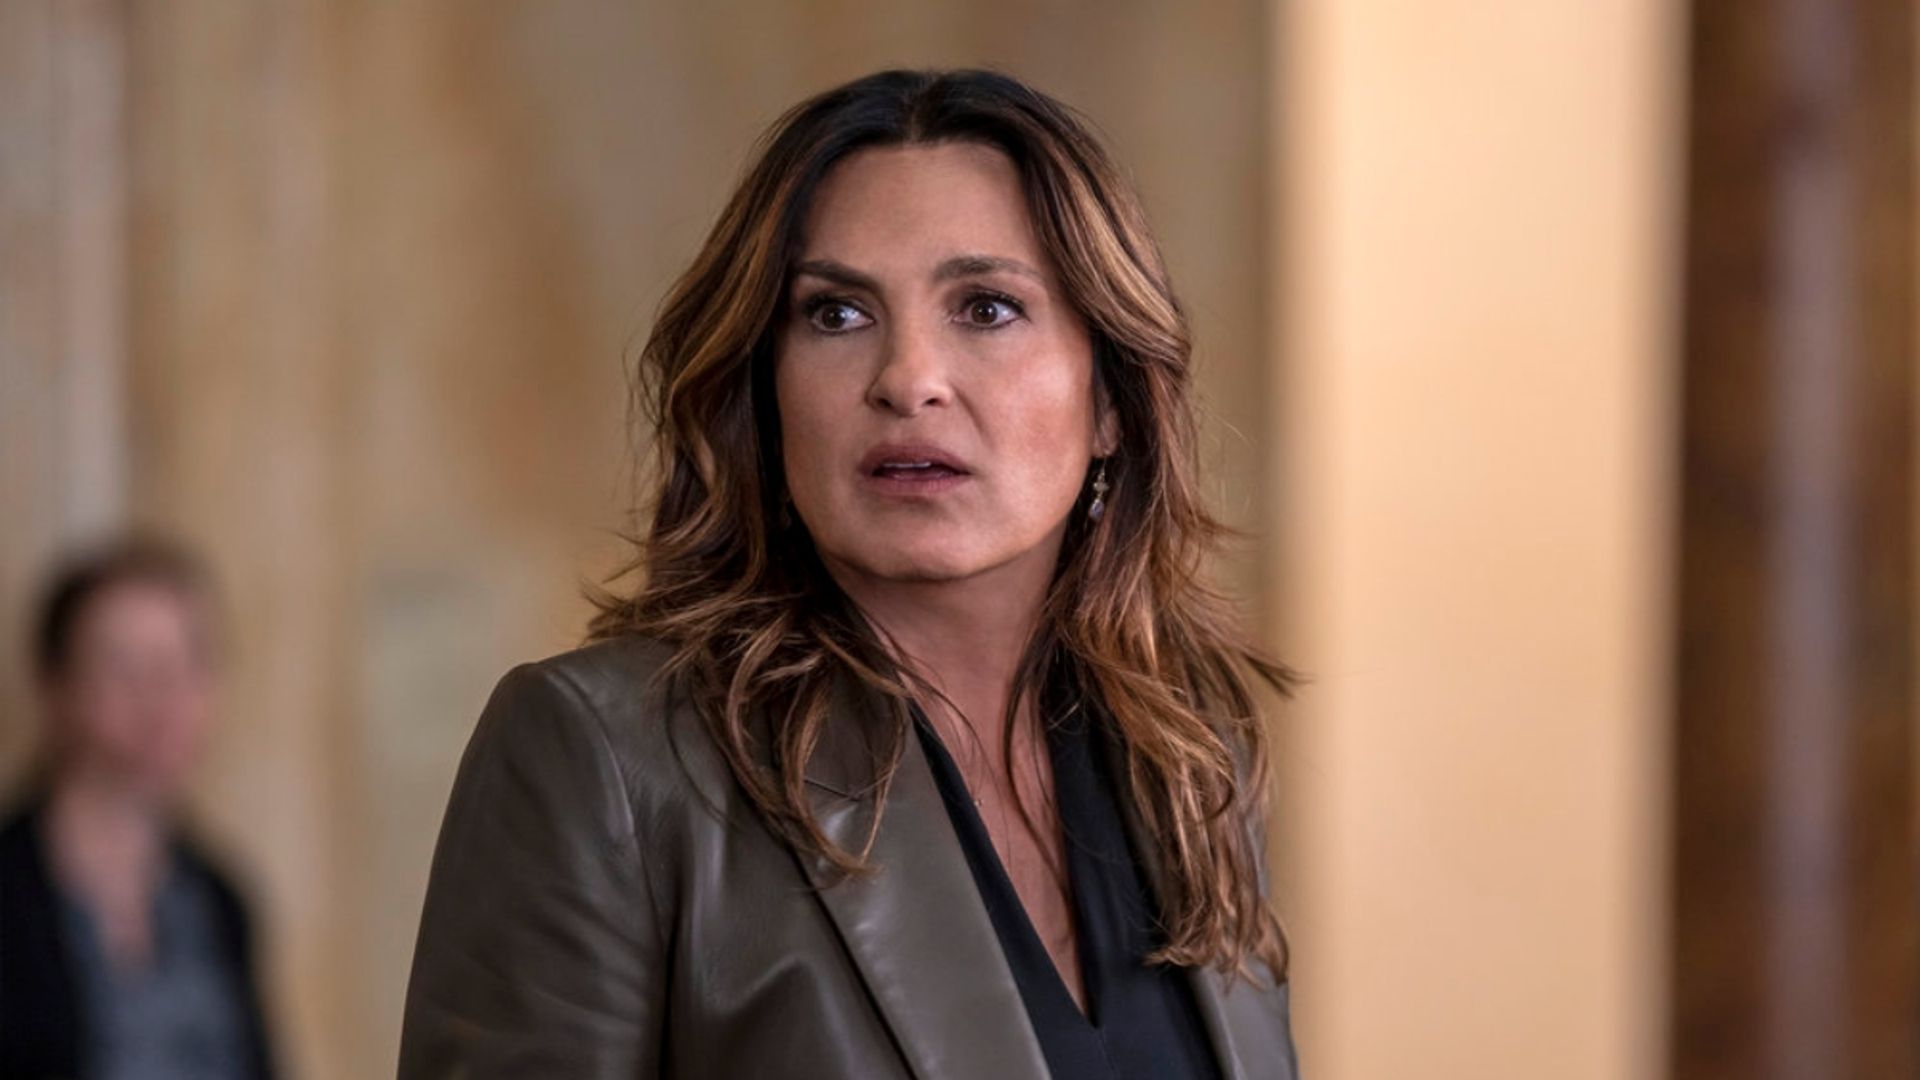 Law And Order Svu Star Mariska Hargitay Surprises Fans With Exciting News About Upcoming 